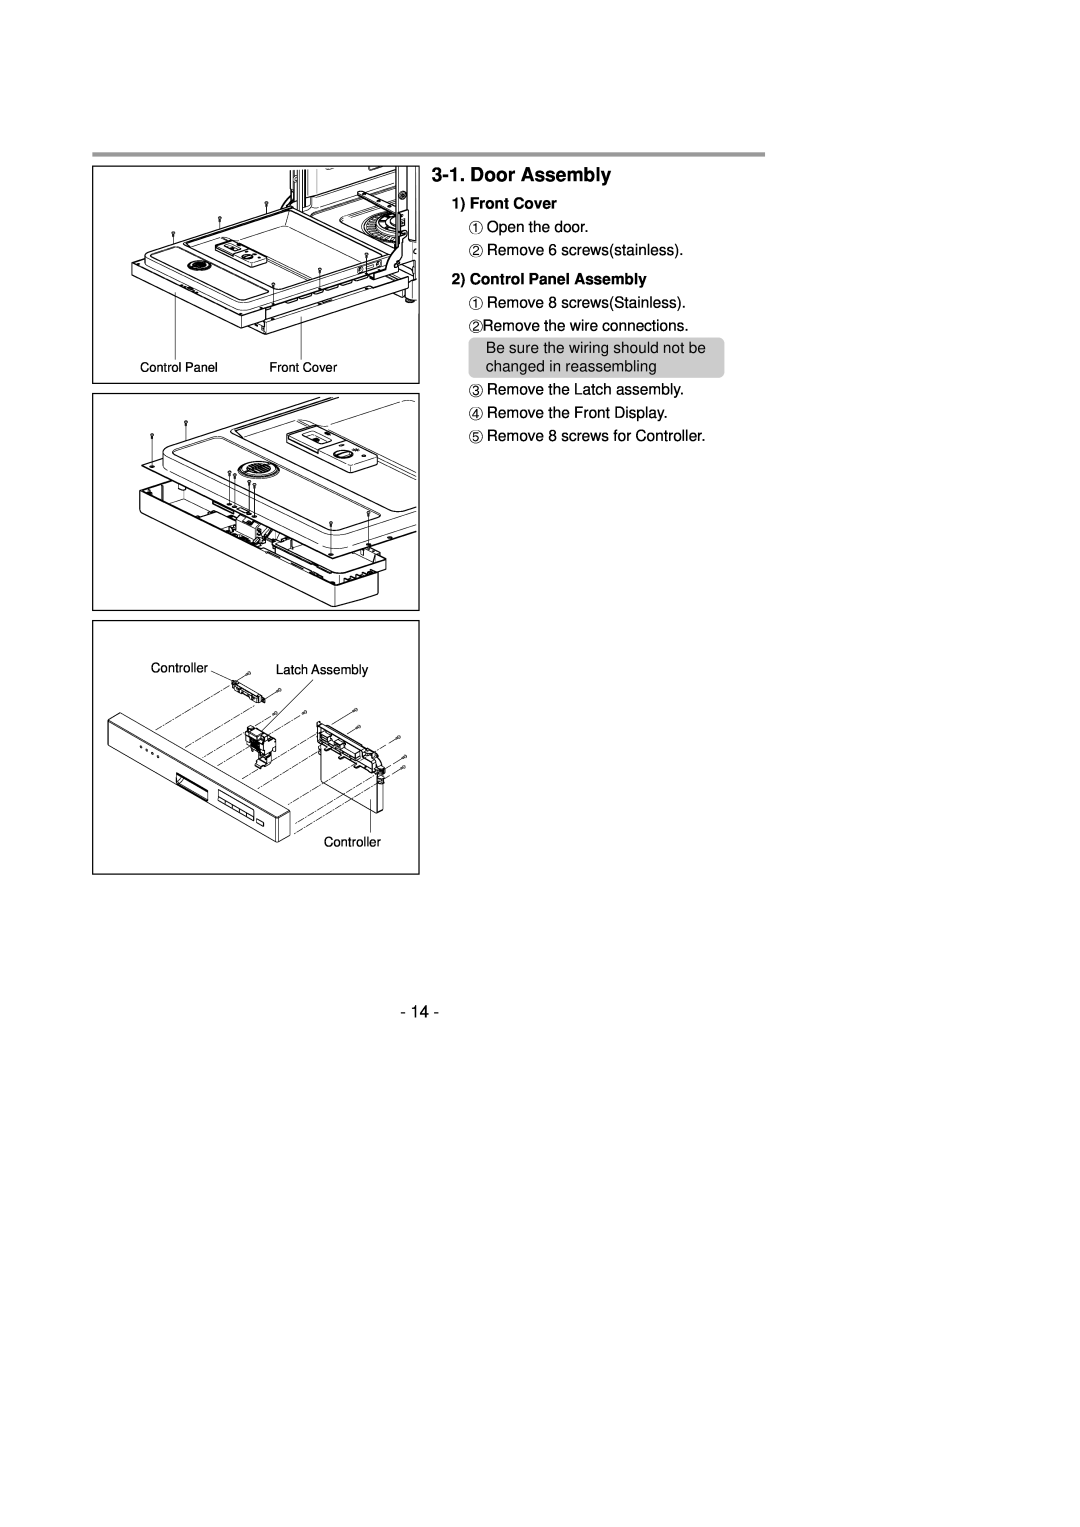 LG Electronics LDS4821(WW service manual Door Assembly, Front Cover, Control Panel Assembly 